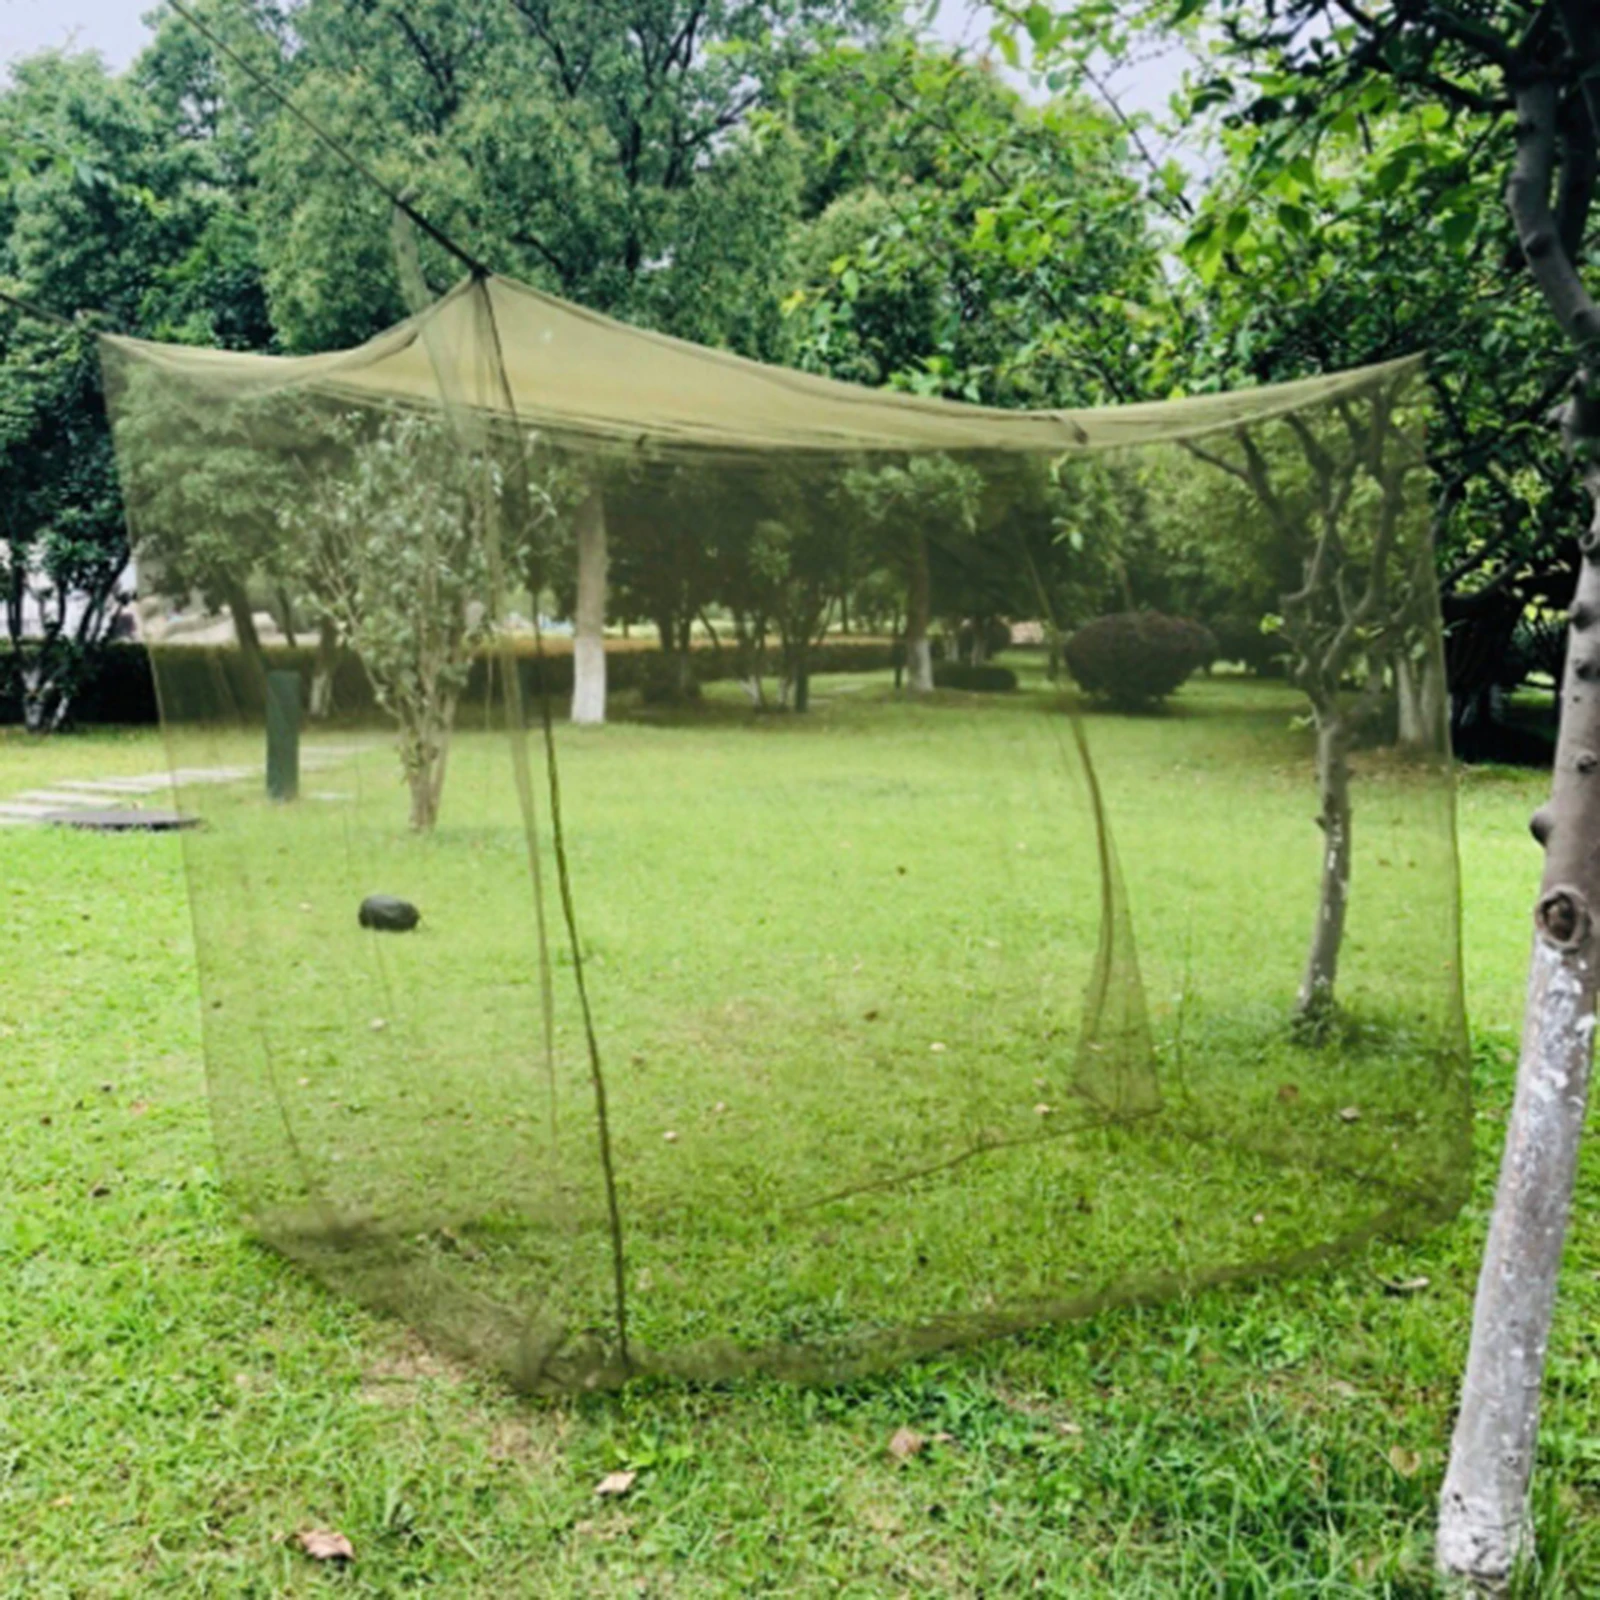 Camping Net Military Green Mesh Portable Square Foldable Mosquito Control Mosquito Net Lightweight Outdoor Camping Tent